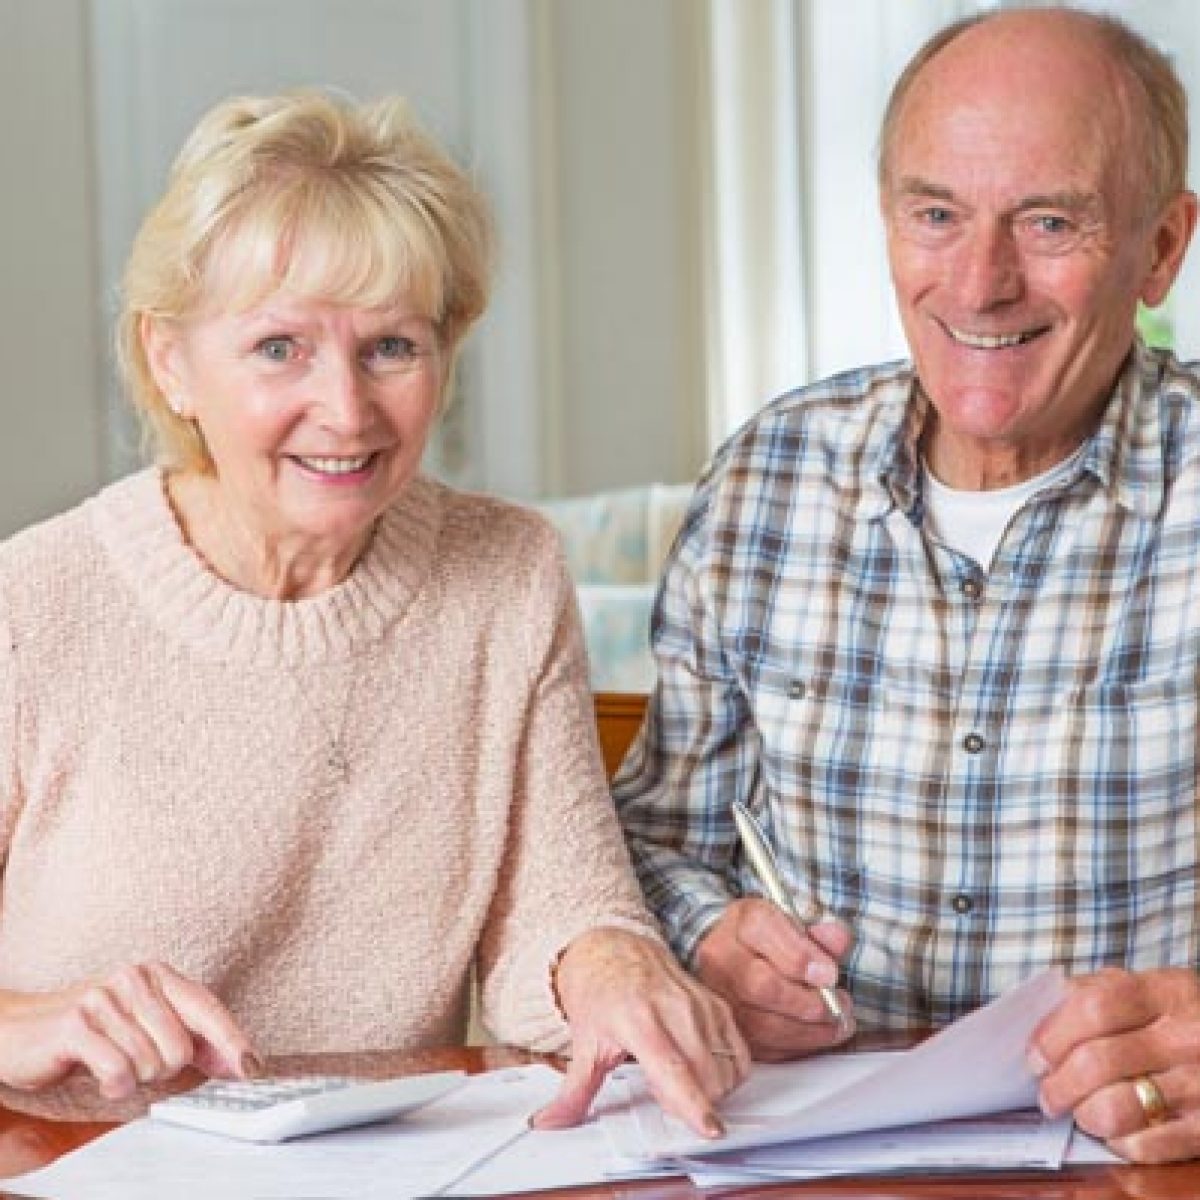 Retirement planning – should you sell your house?